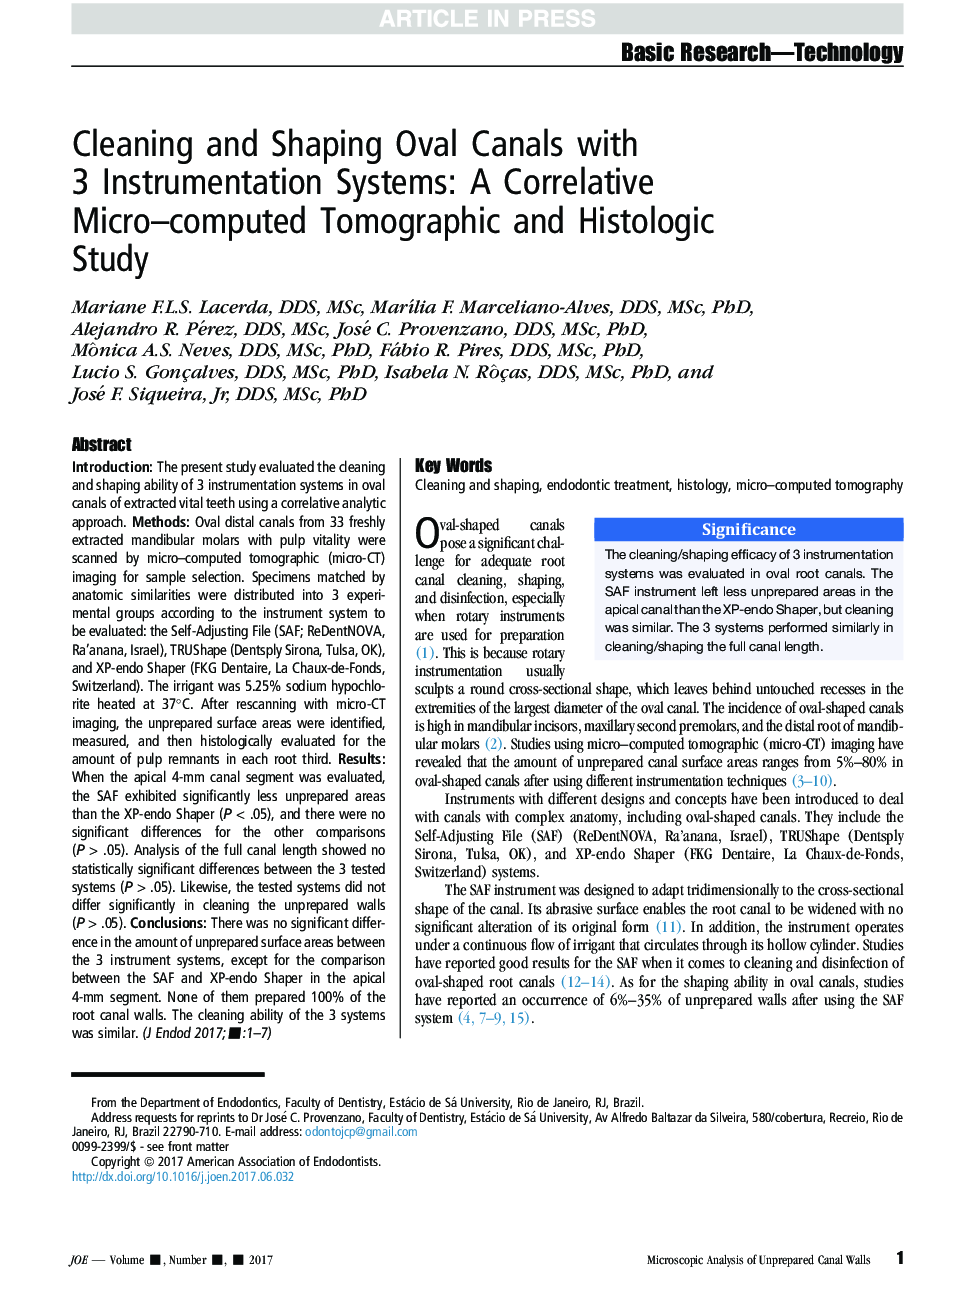 Cleaning and Shaping Oval Canals with 3Â Instrumentation Systems: A Correlative Micro-computed Tomographic and Histologic Study